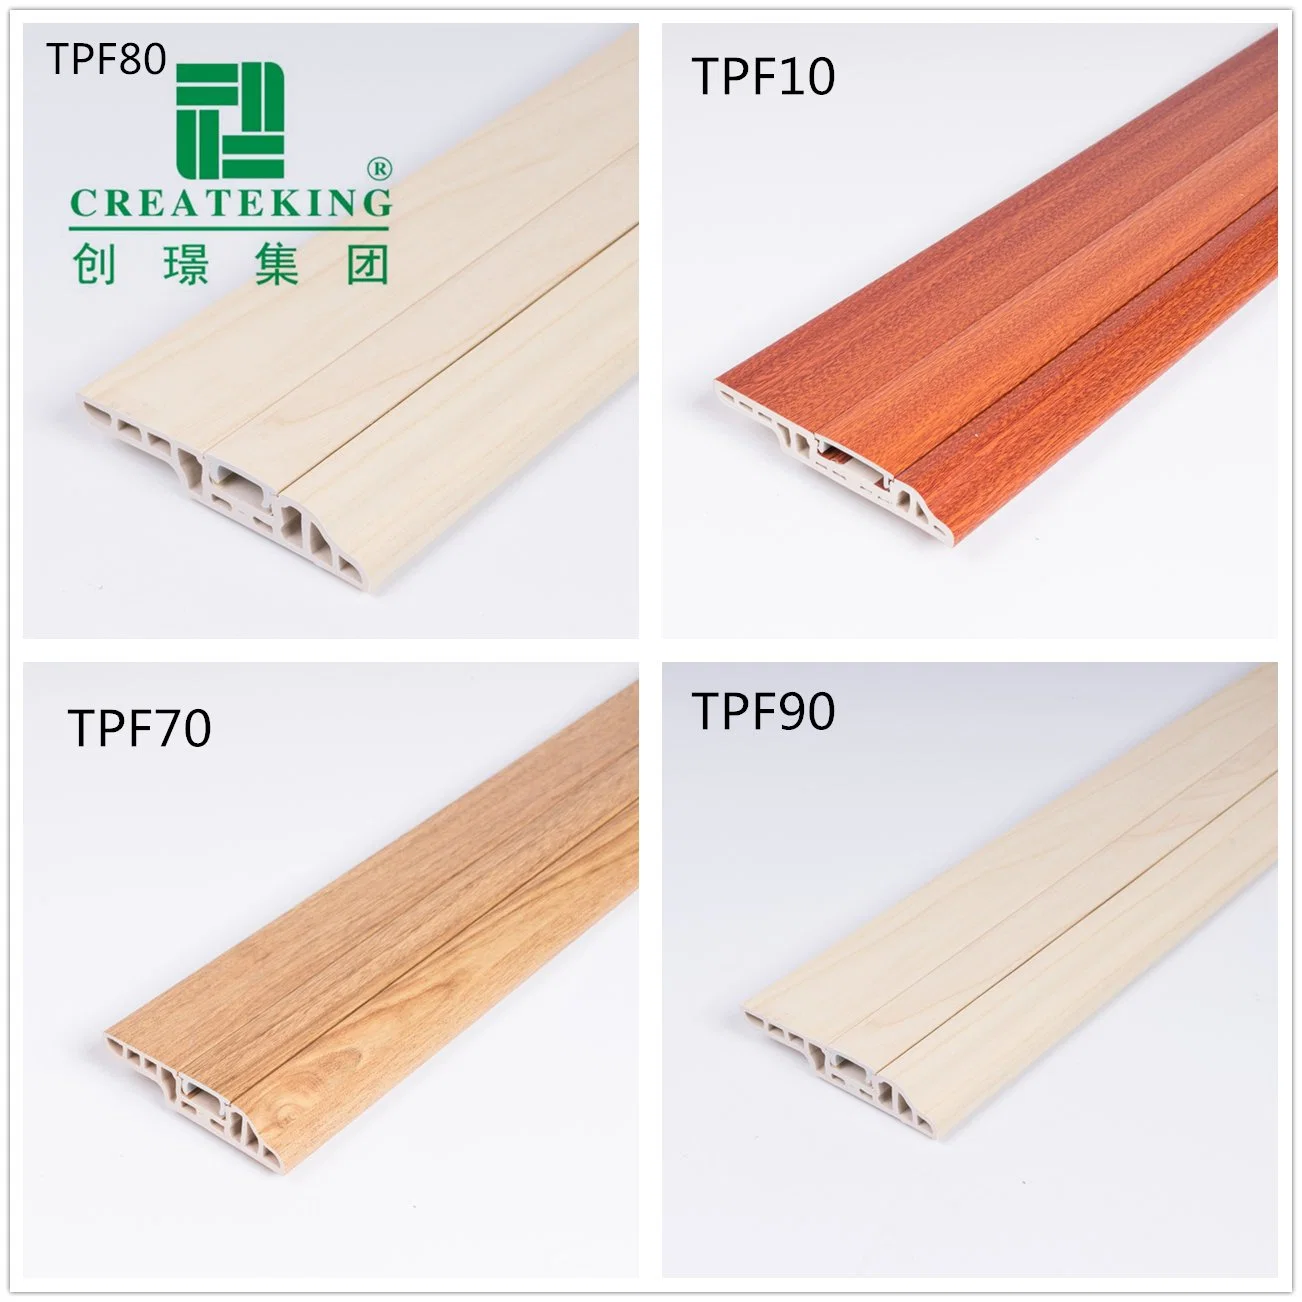 Decorative Baseboard Covers Clips Flexible PVC Wall Skirting Board